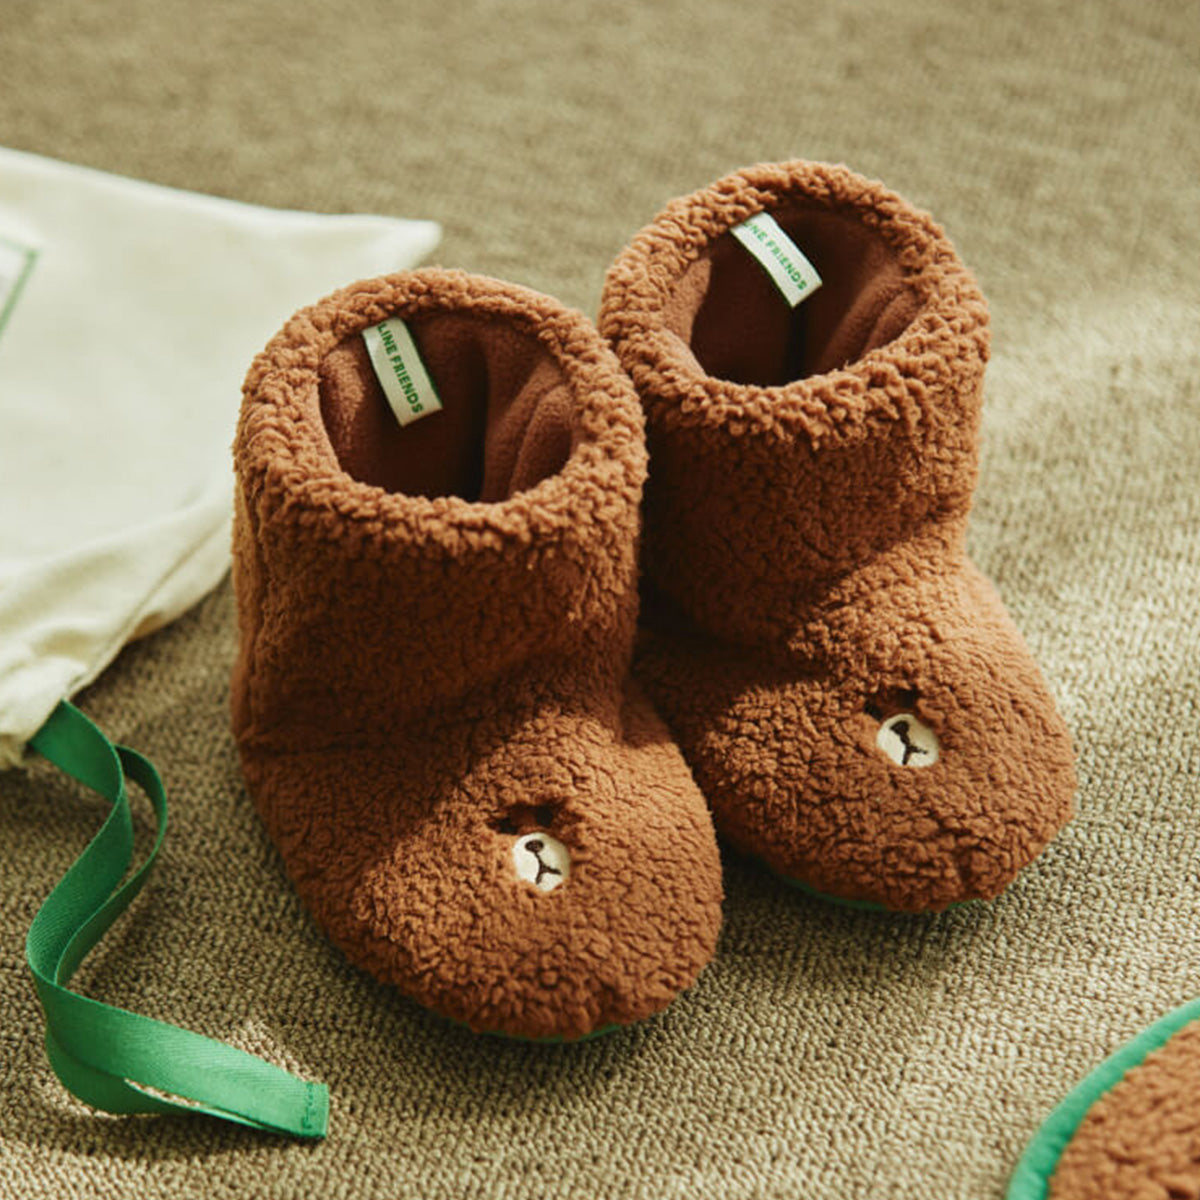 Ladies Sheepskin Lined Bootee Slippers at Lambland